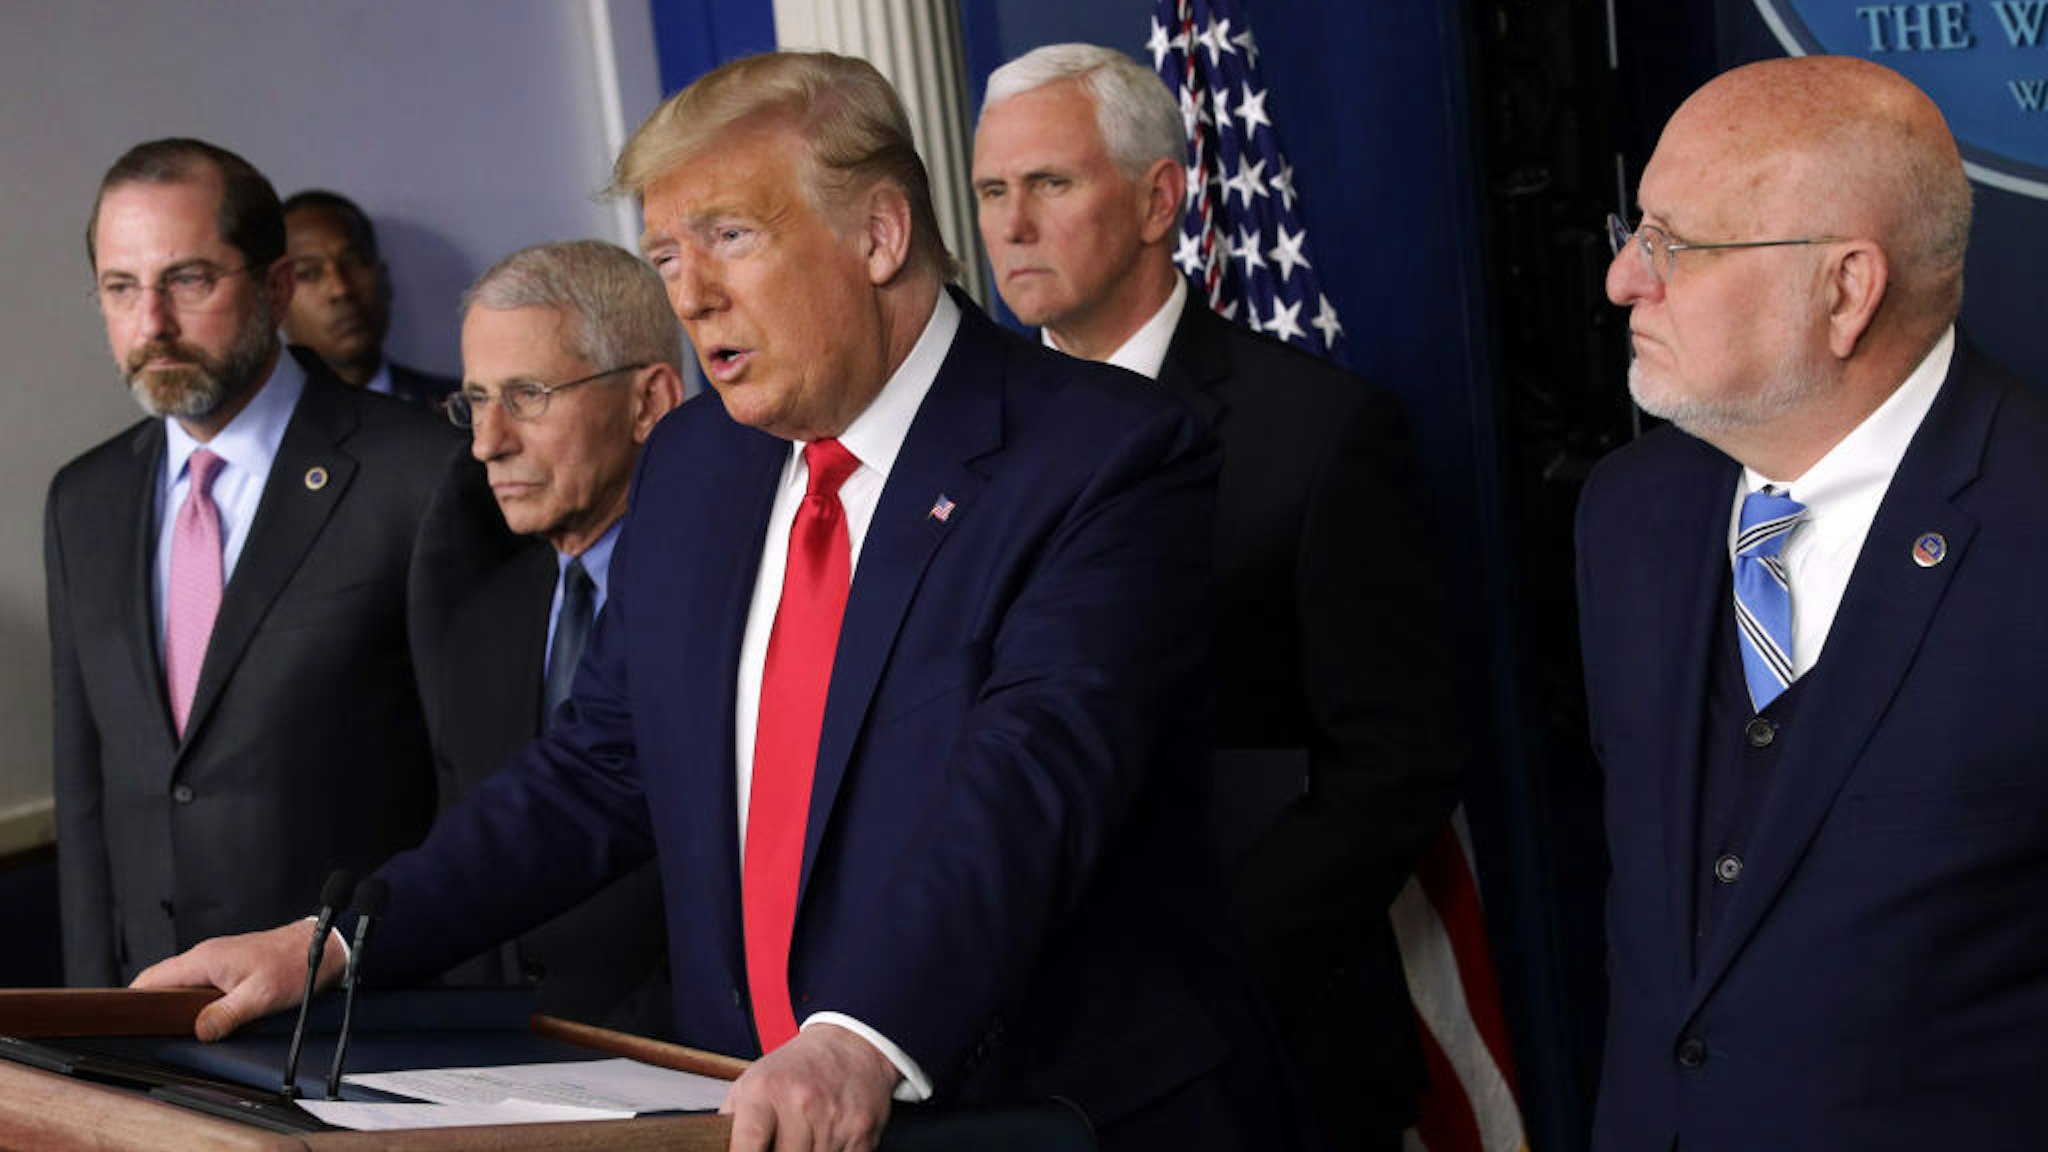 U.S. President Donald Trump speaks as Health and Human Services Secretary Alex Azar, National Institute for Allergy and Infectious Diseases Director Anthony Fauci, Vice President Mike Pence, and Centers for Disease Control and Prevention Director Robert Redfield listen during a news conference at the James Brady Press Briefing Room at the White House February 29, 2020 in Washington, DC. Department of Health in Washington State has reported the first death in the U.S. related to the coronavirus. (Photo by Alex Wong/Getty Images)